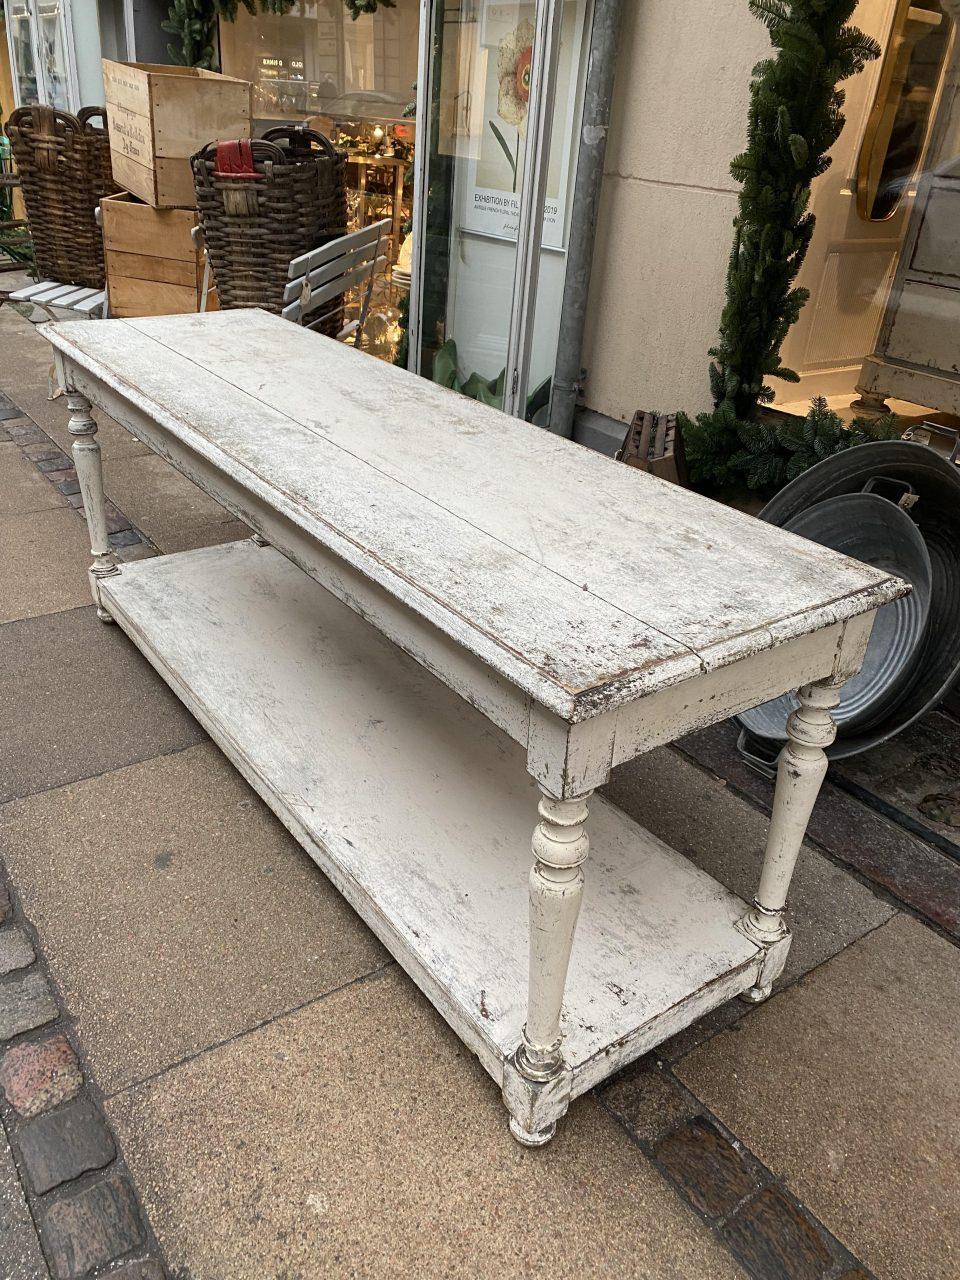 Sophisticated, stunning and well-proportioned console table / drapery table, painted a whitish tone. France circa 1900. Originally boutique inventory, for the storage, presentation and measuring of fabric rolls / textiles.

Elegant yet also raw